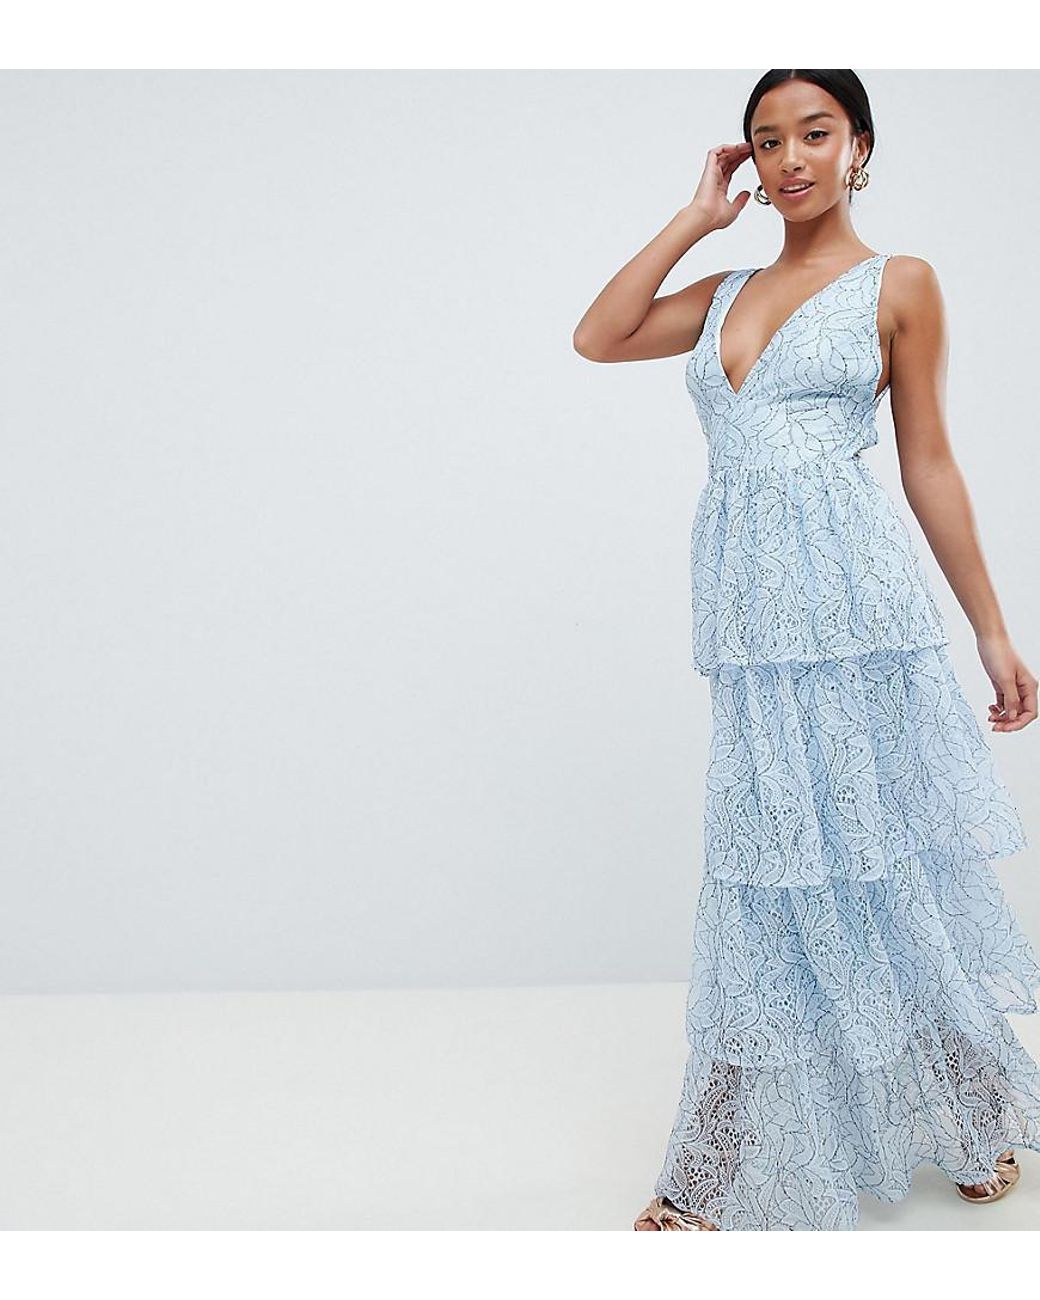 Missguided Exclusive Petite Lace Tiered Maxi Dress in Blue | Lyst Canada